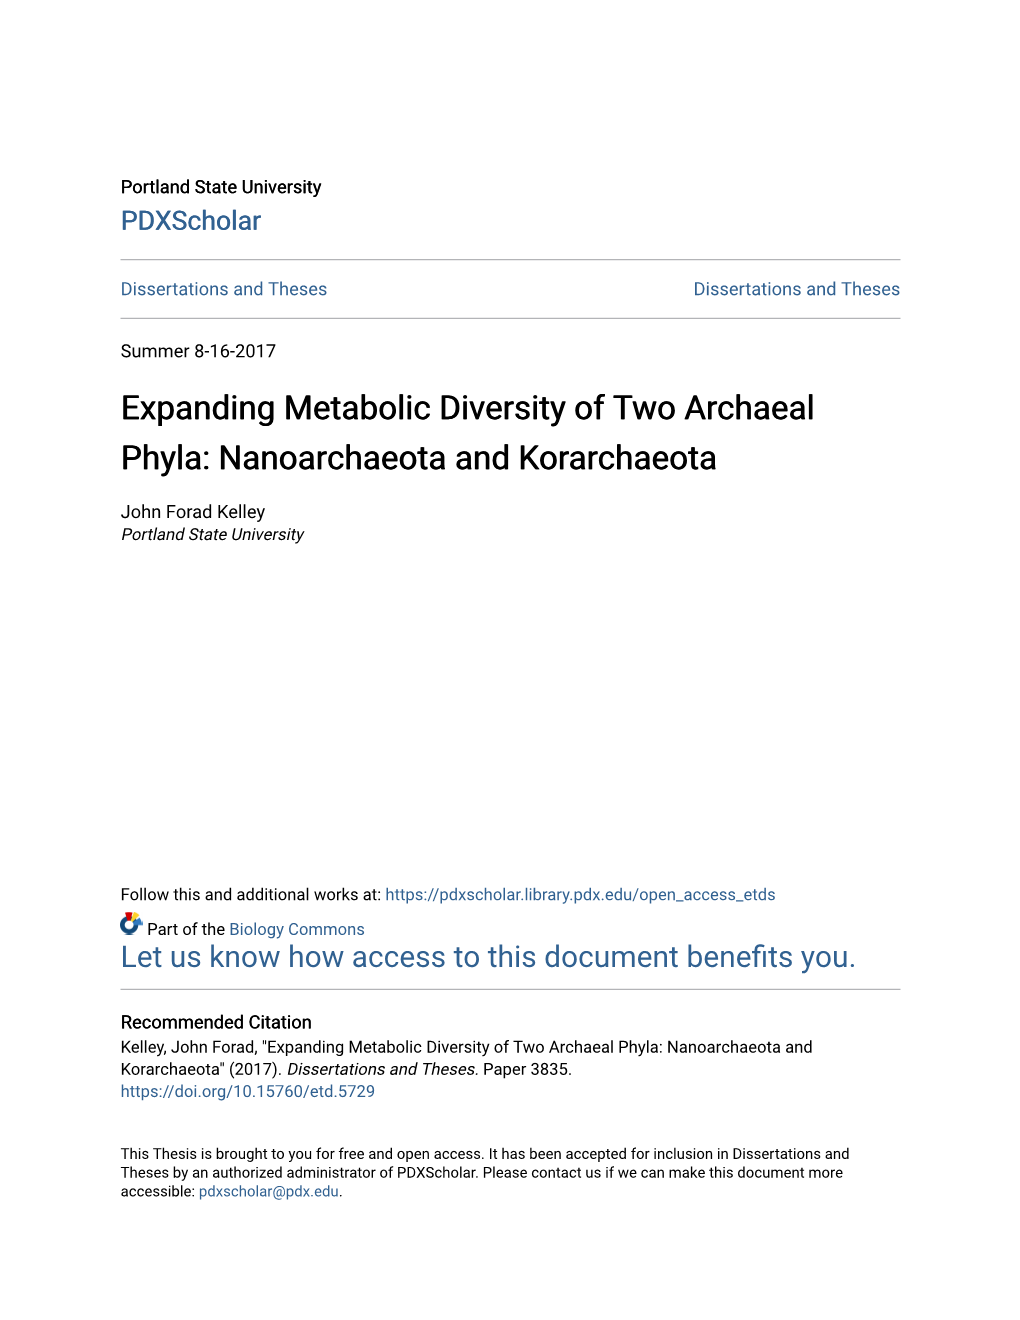 Expanding Metabolic Diversity of Two Archaeal Phyla: Nanoarchaeota and Korarchaeota